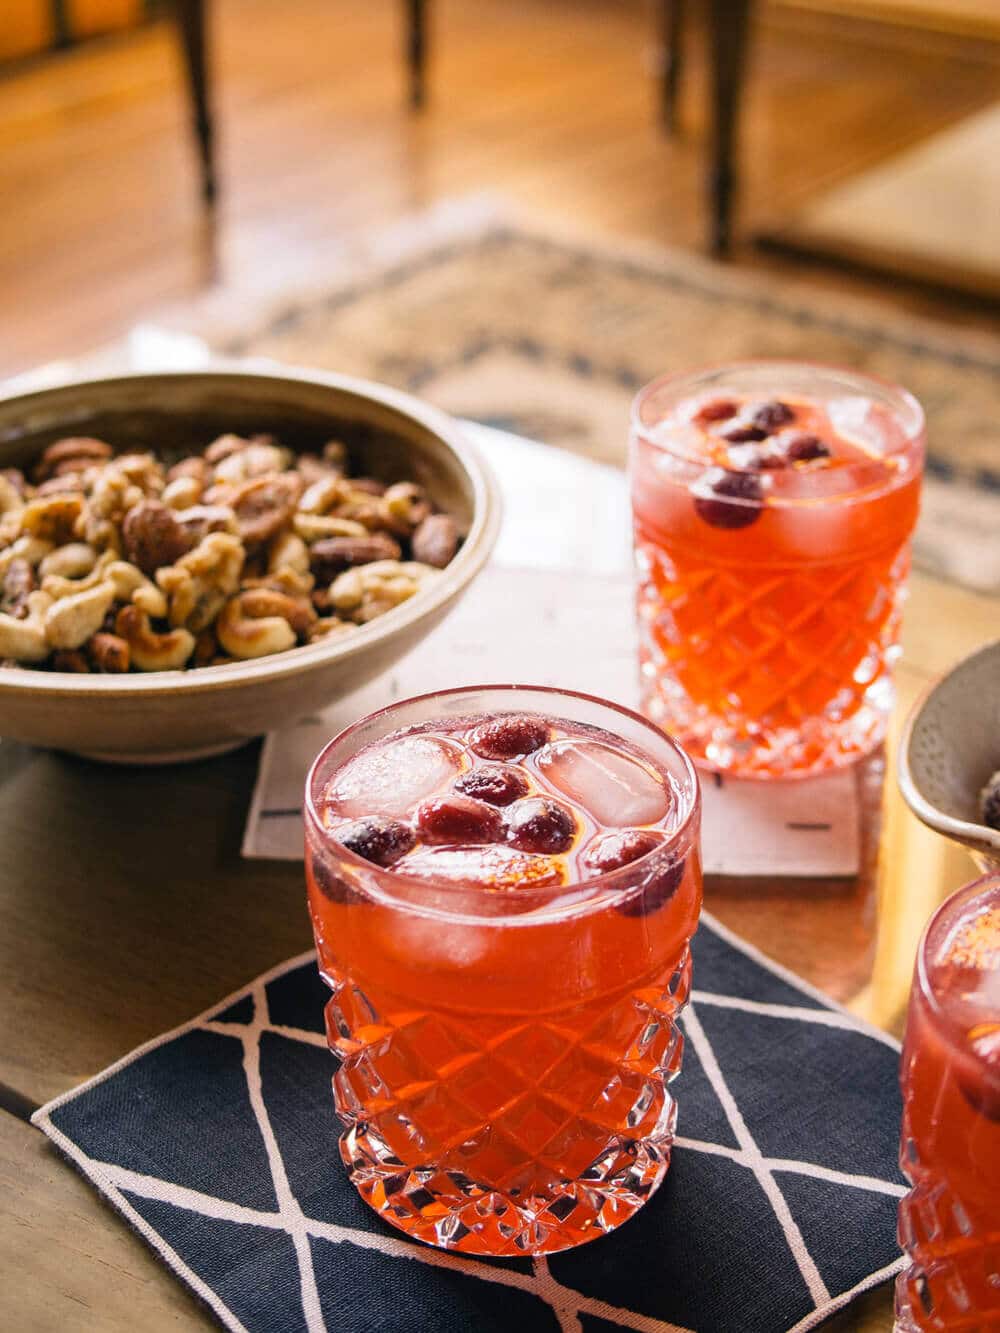 Cranberry moscow mules, sugared cranberries, and holiday nuts